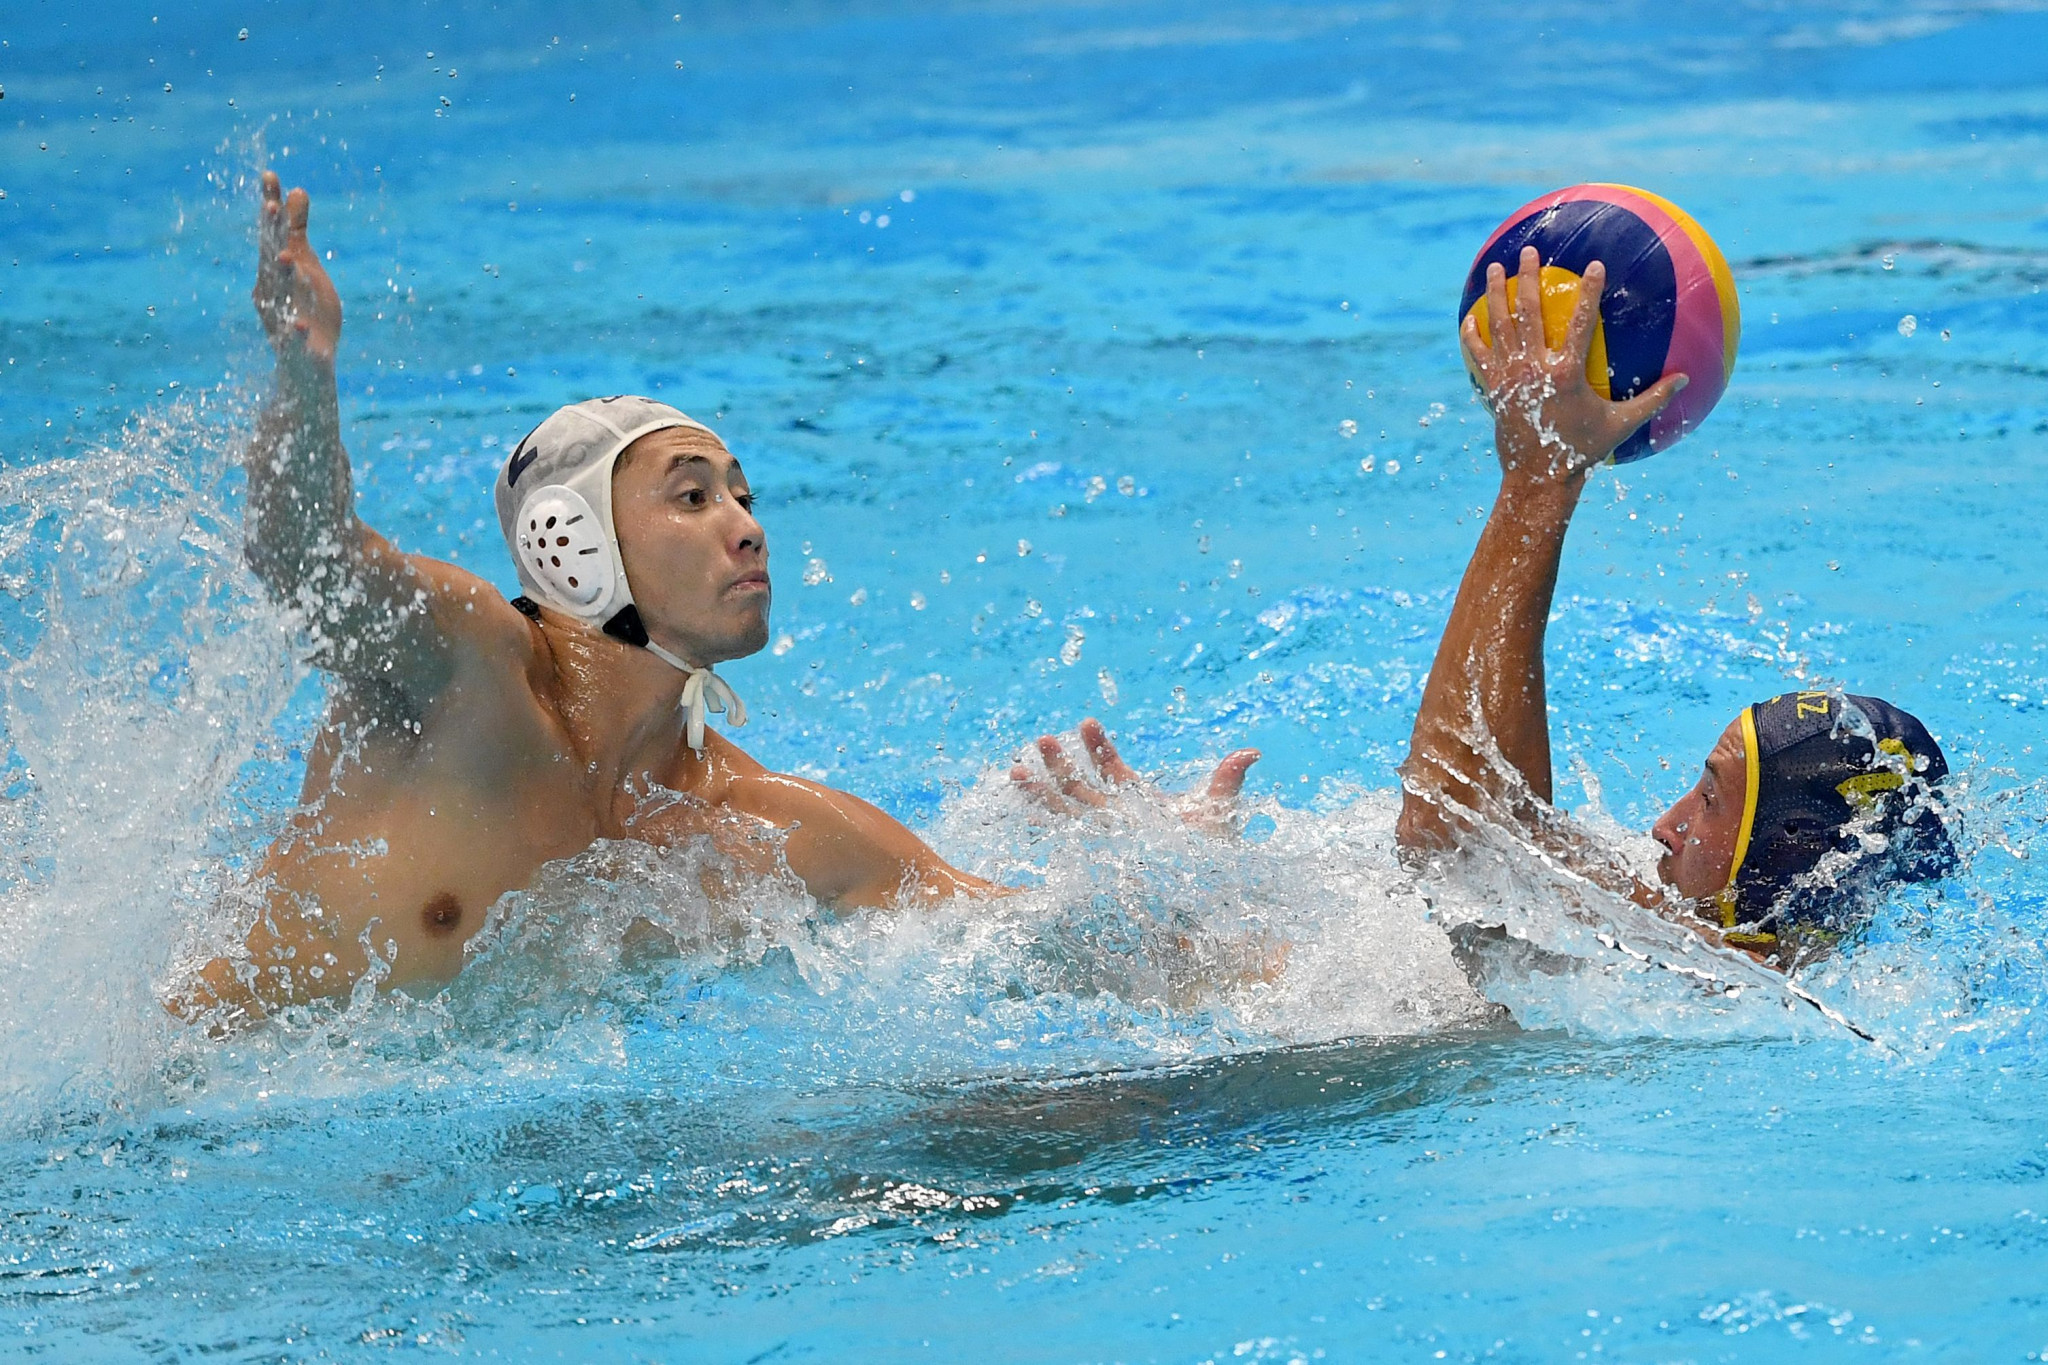 Kazakhstan claimed a narrow 8-7 win over Japan to secure a record sixth Asian Games men's water polo title ©Getty Images